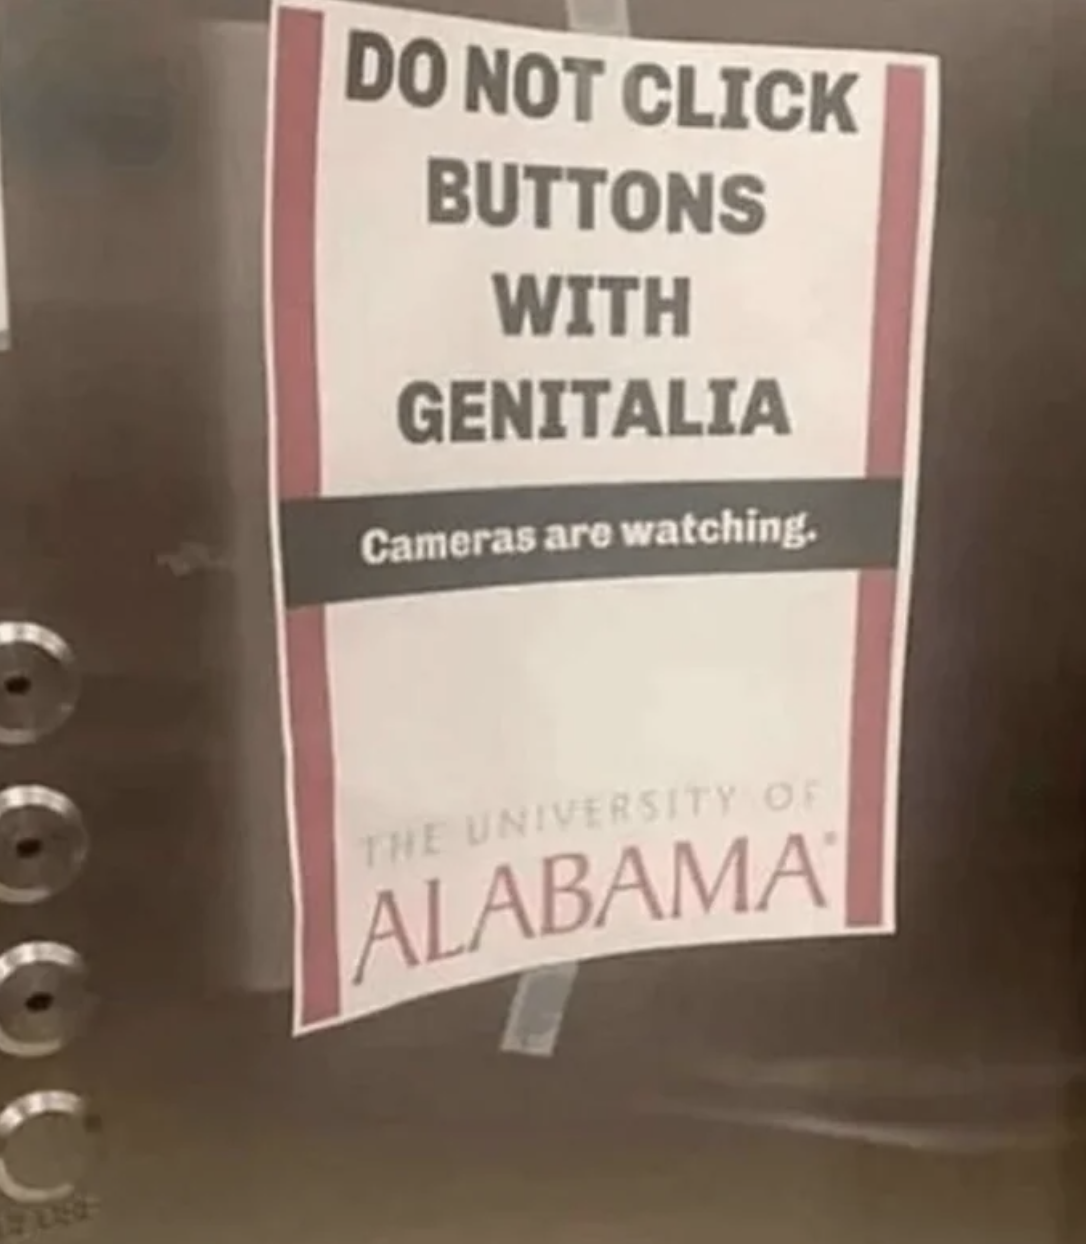 &quot;Do not click buttons with genitalia / Cameras are watching&quot; at the University of Alabama